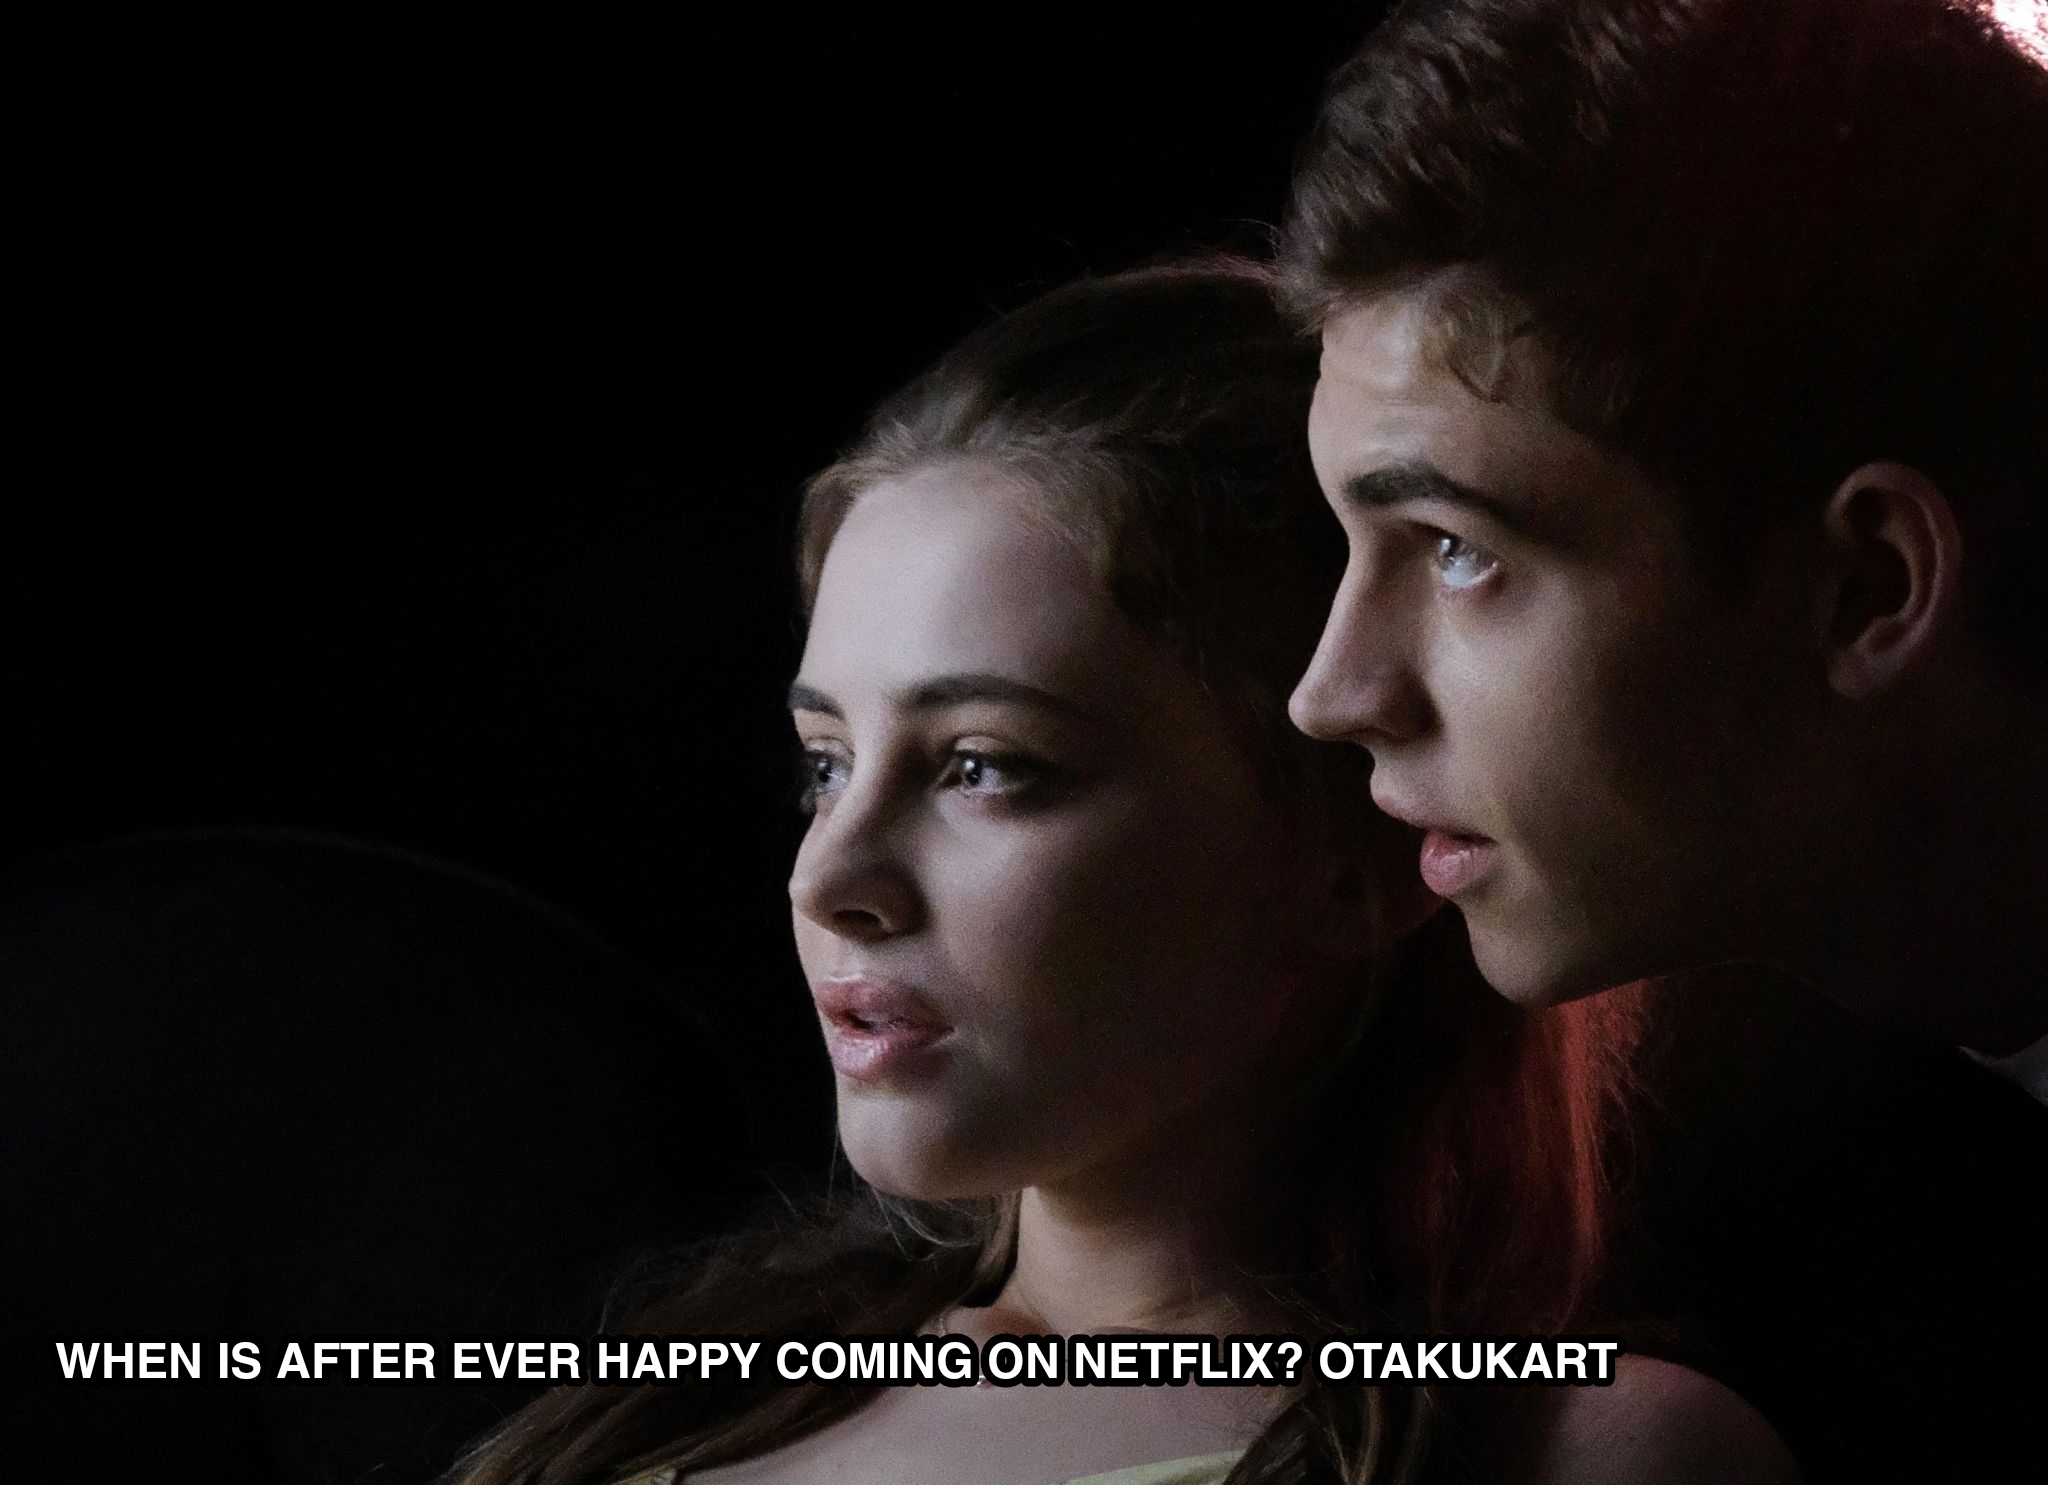 When Is After Ever Happy Coming On Netflix?